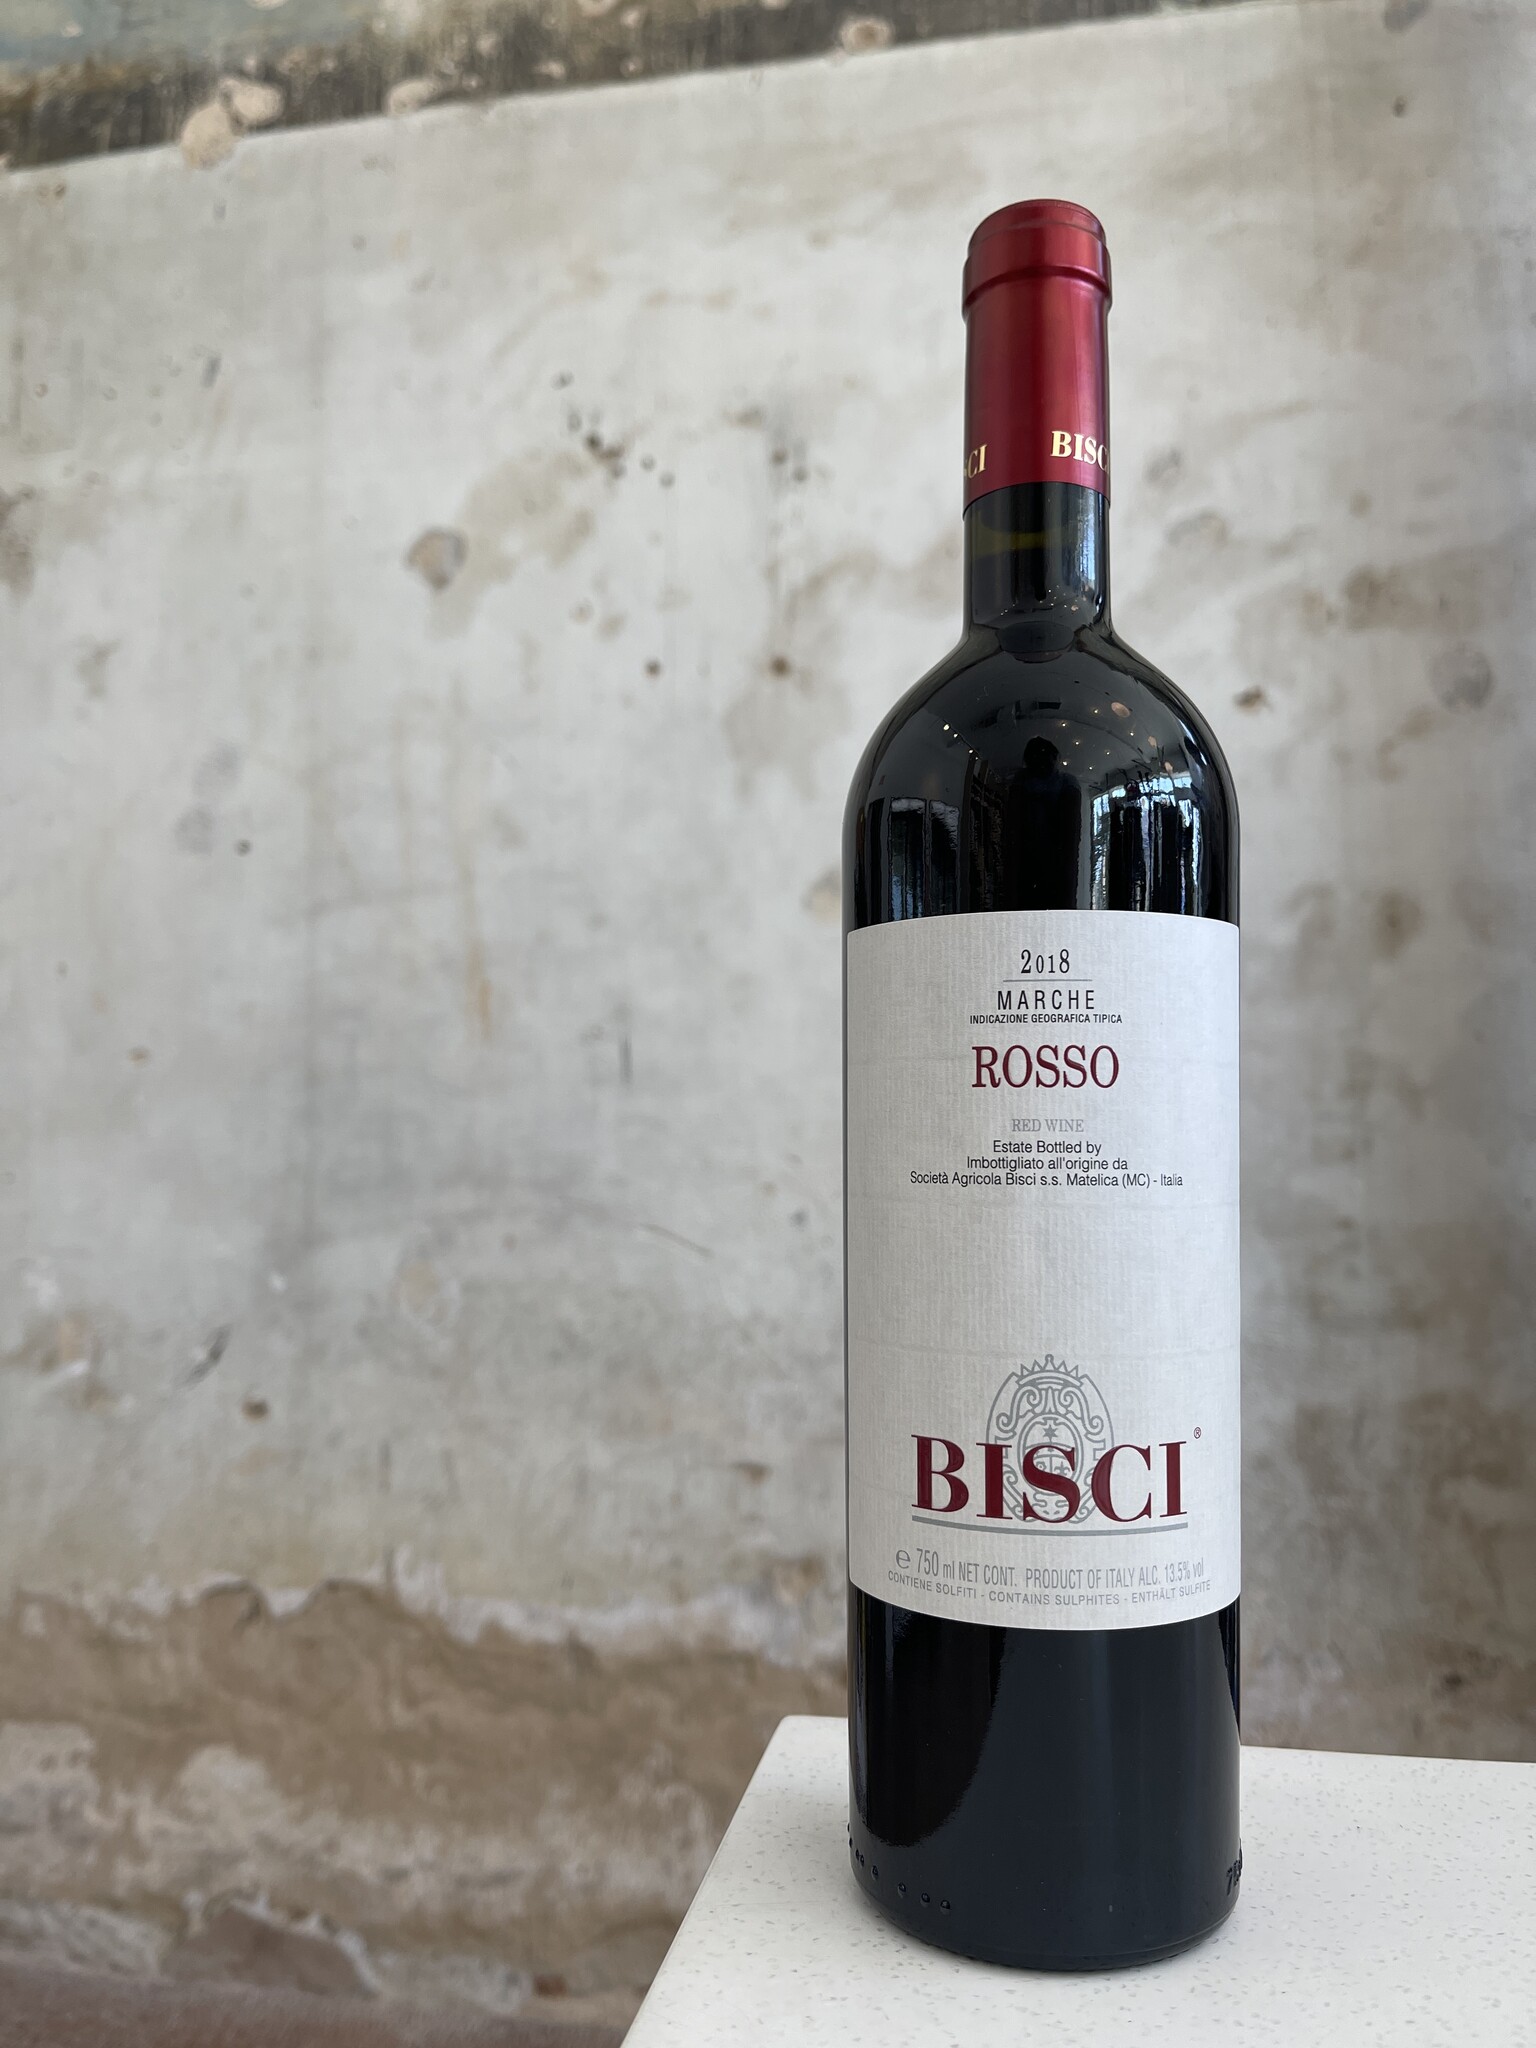 Bisci Marche Rosso IGT